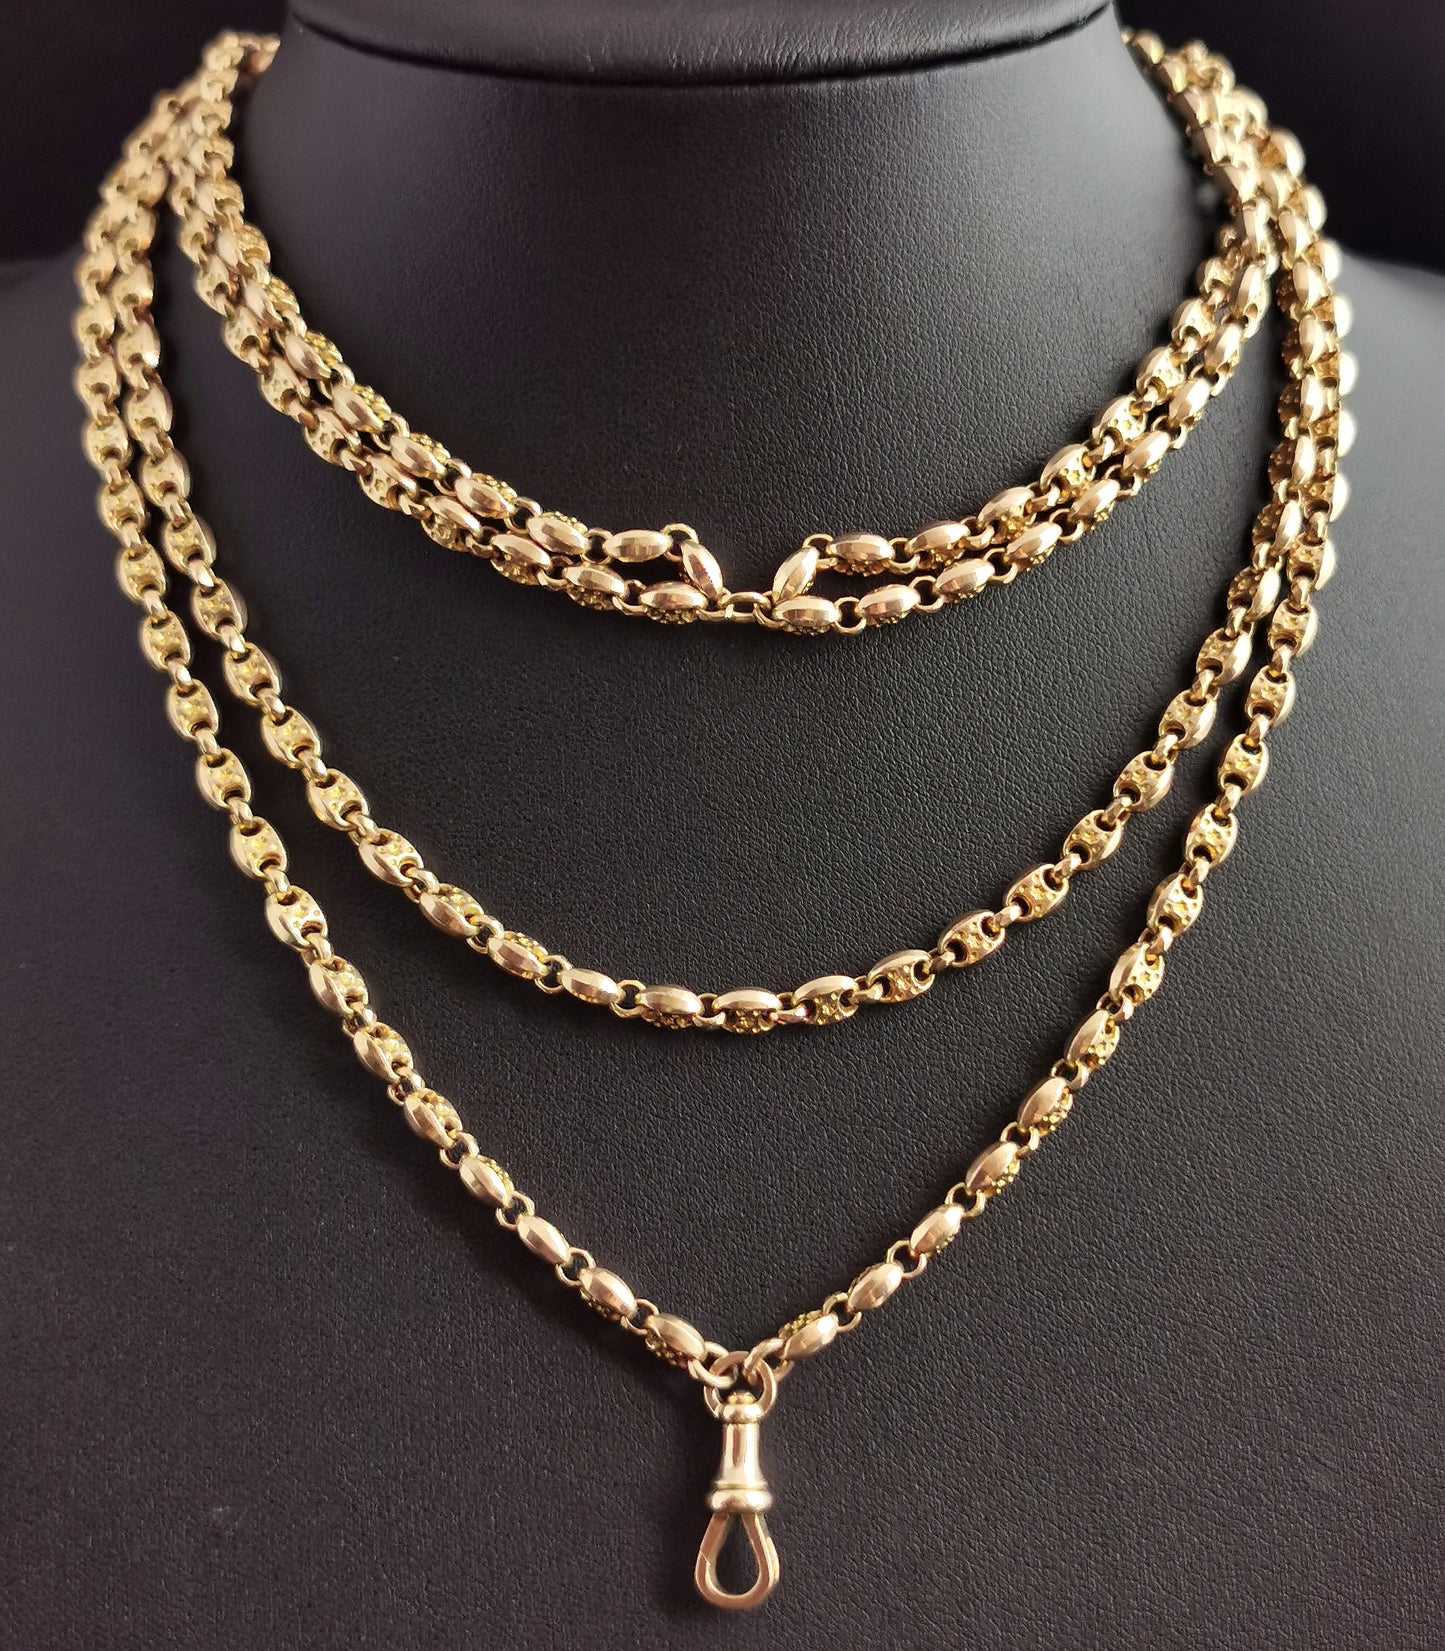 Antique 10ct gold longuard chain, muff chain necklace, heavy